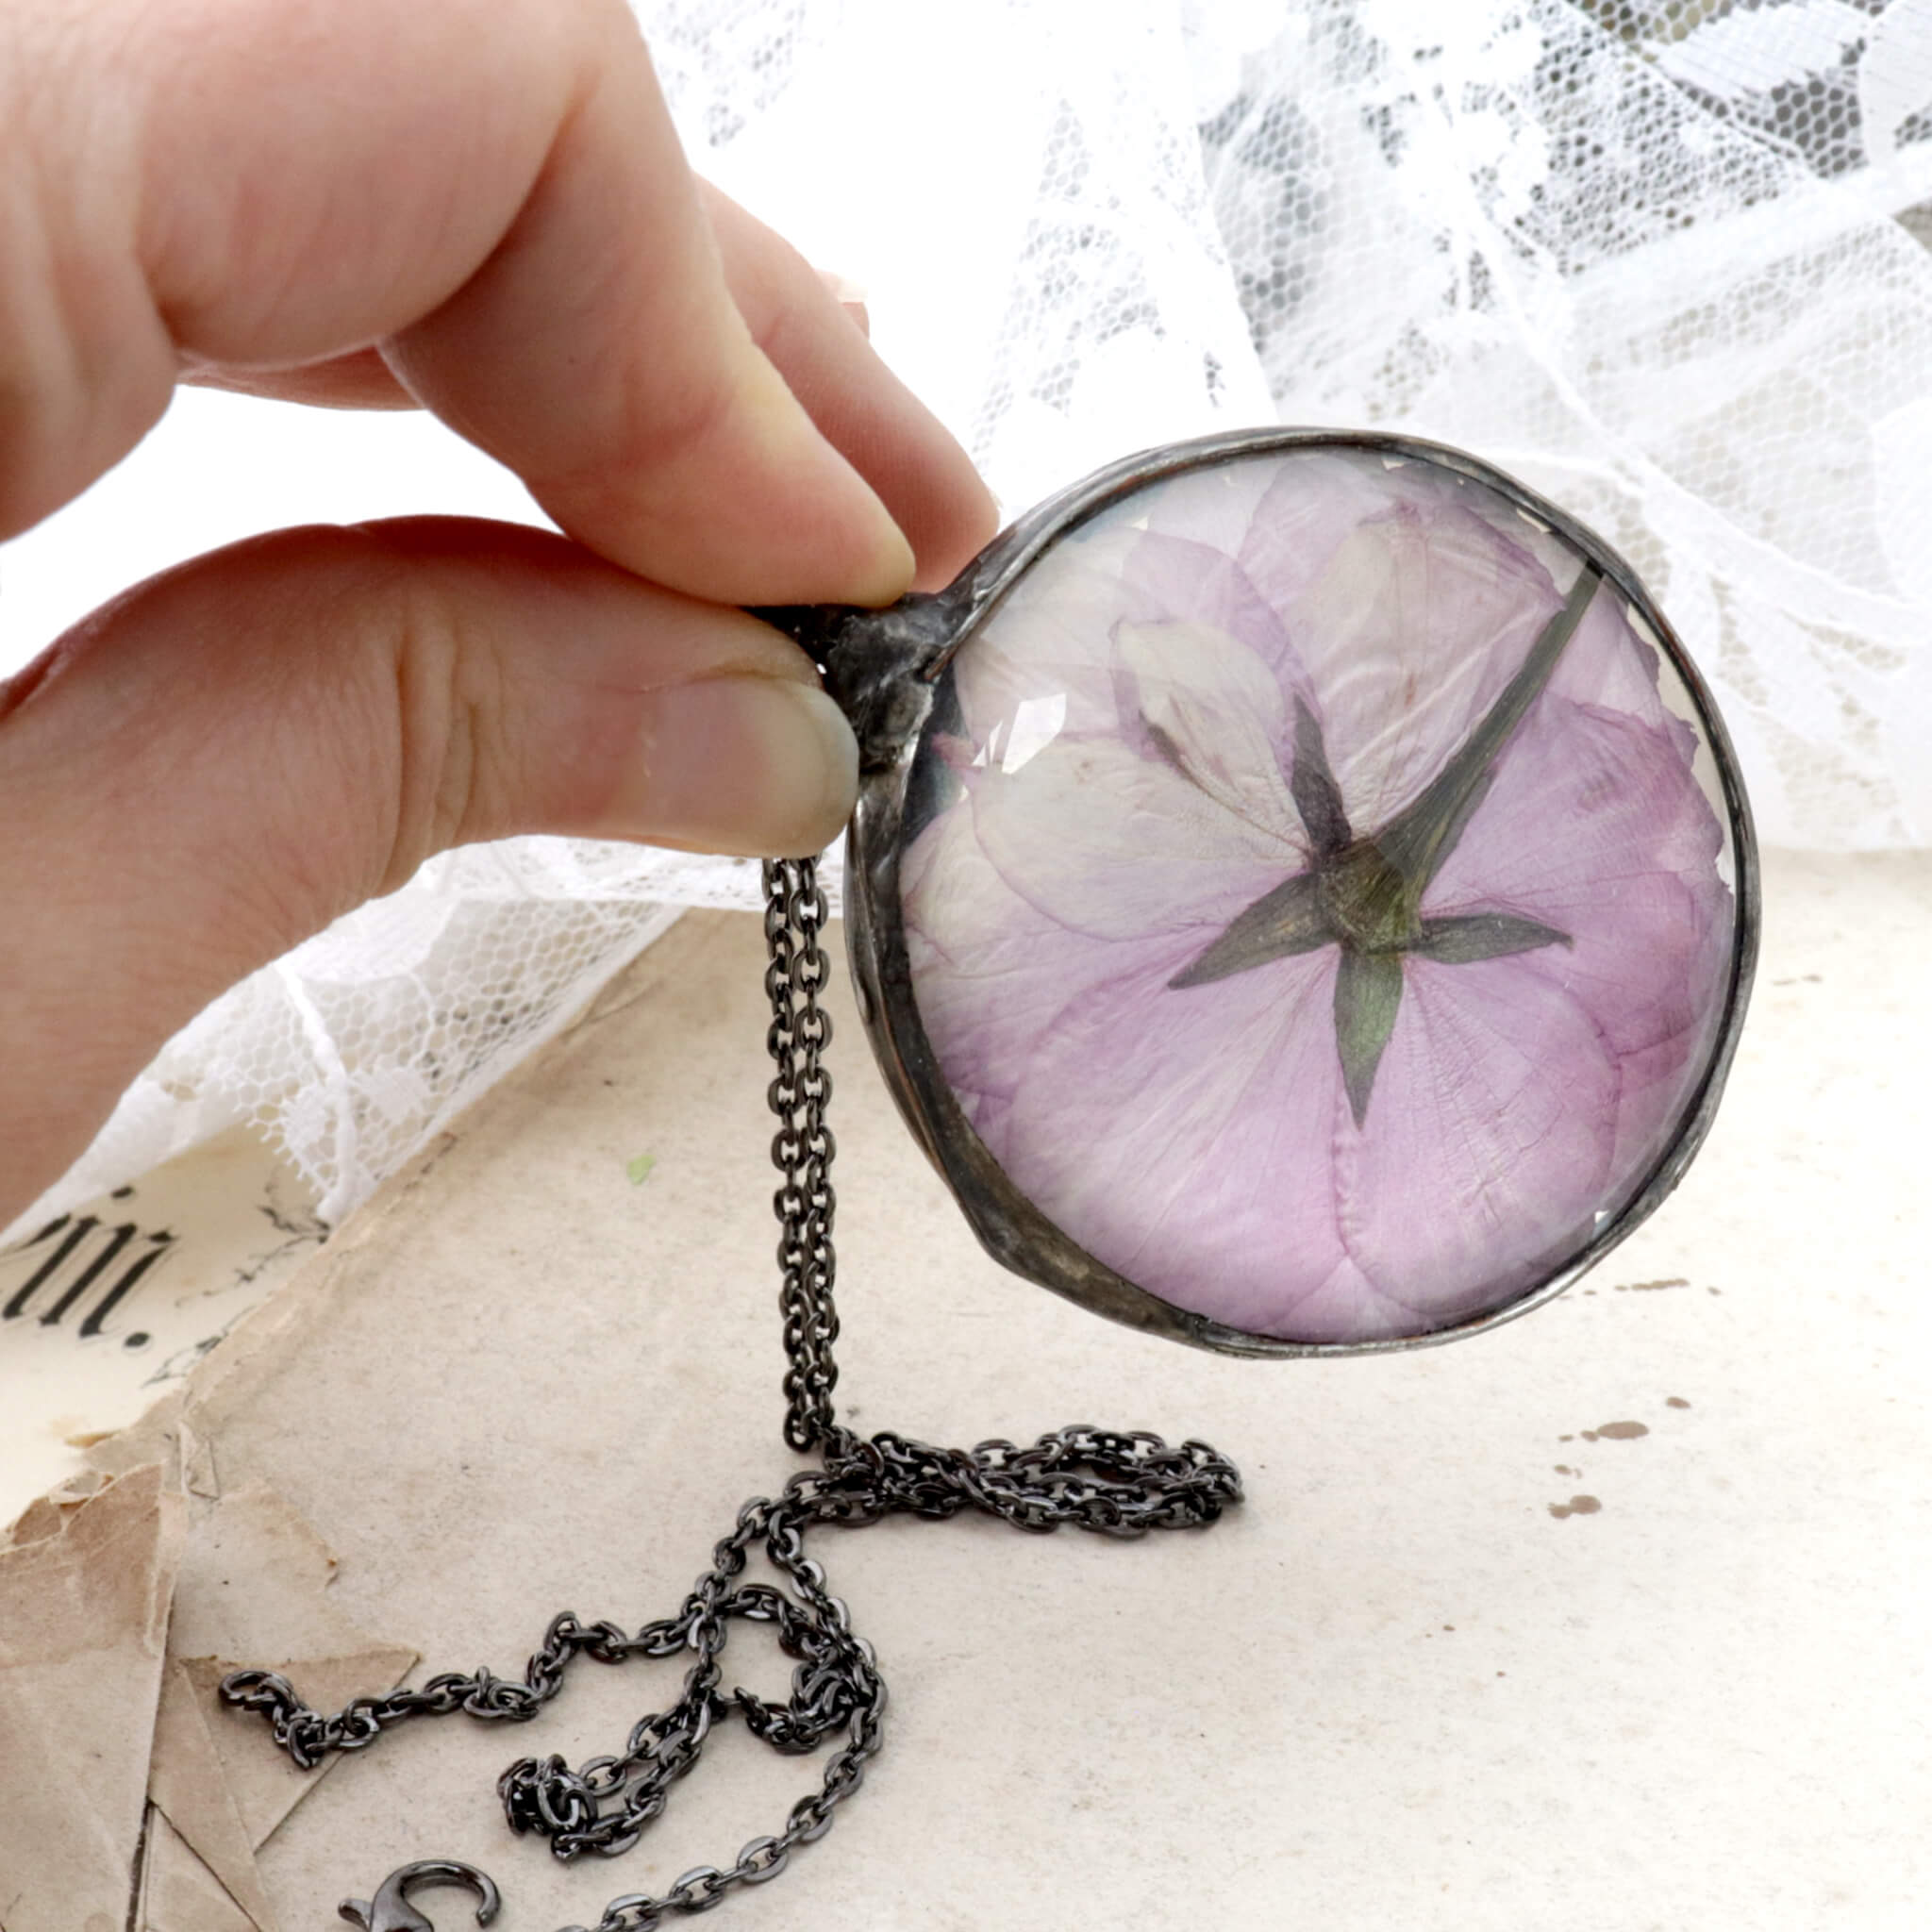 Round cherry blossom necklace being hold between thumb and index finger